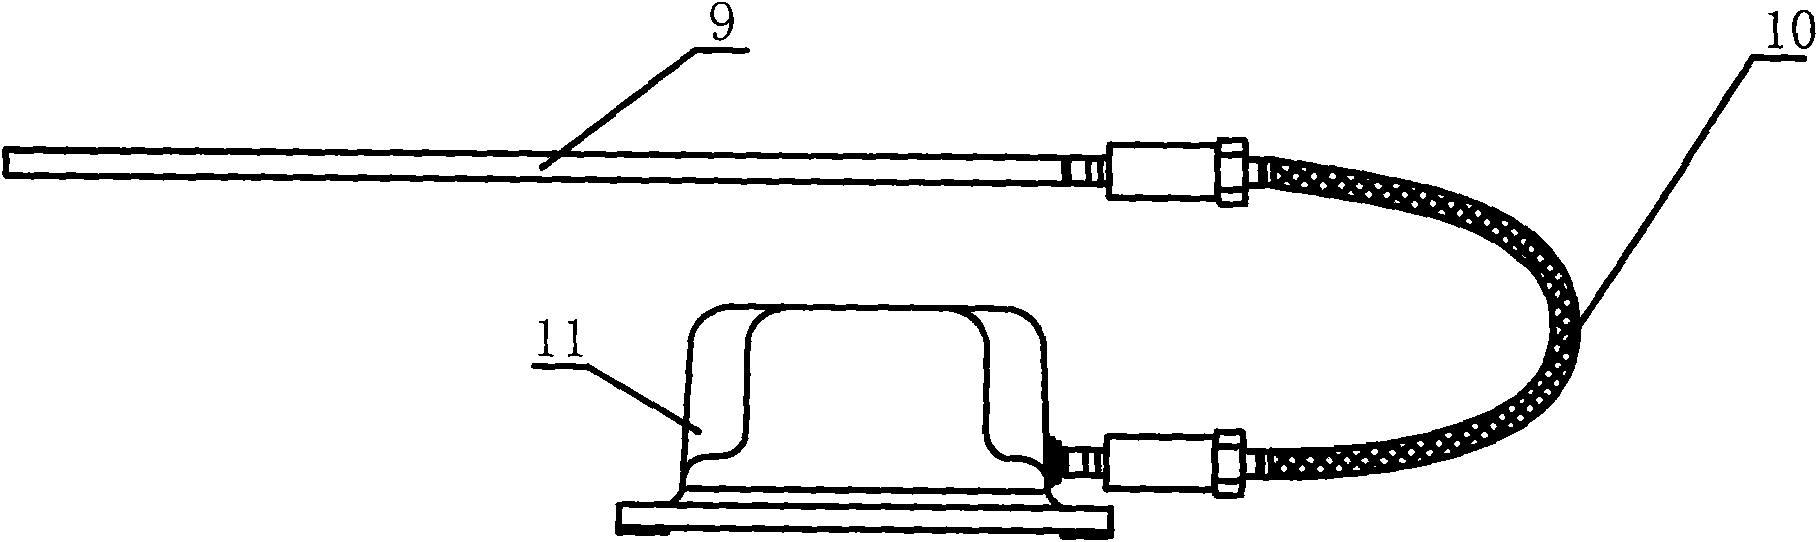 Ignition control system of tube furnace